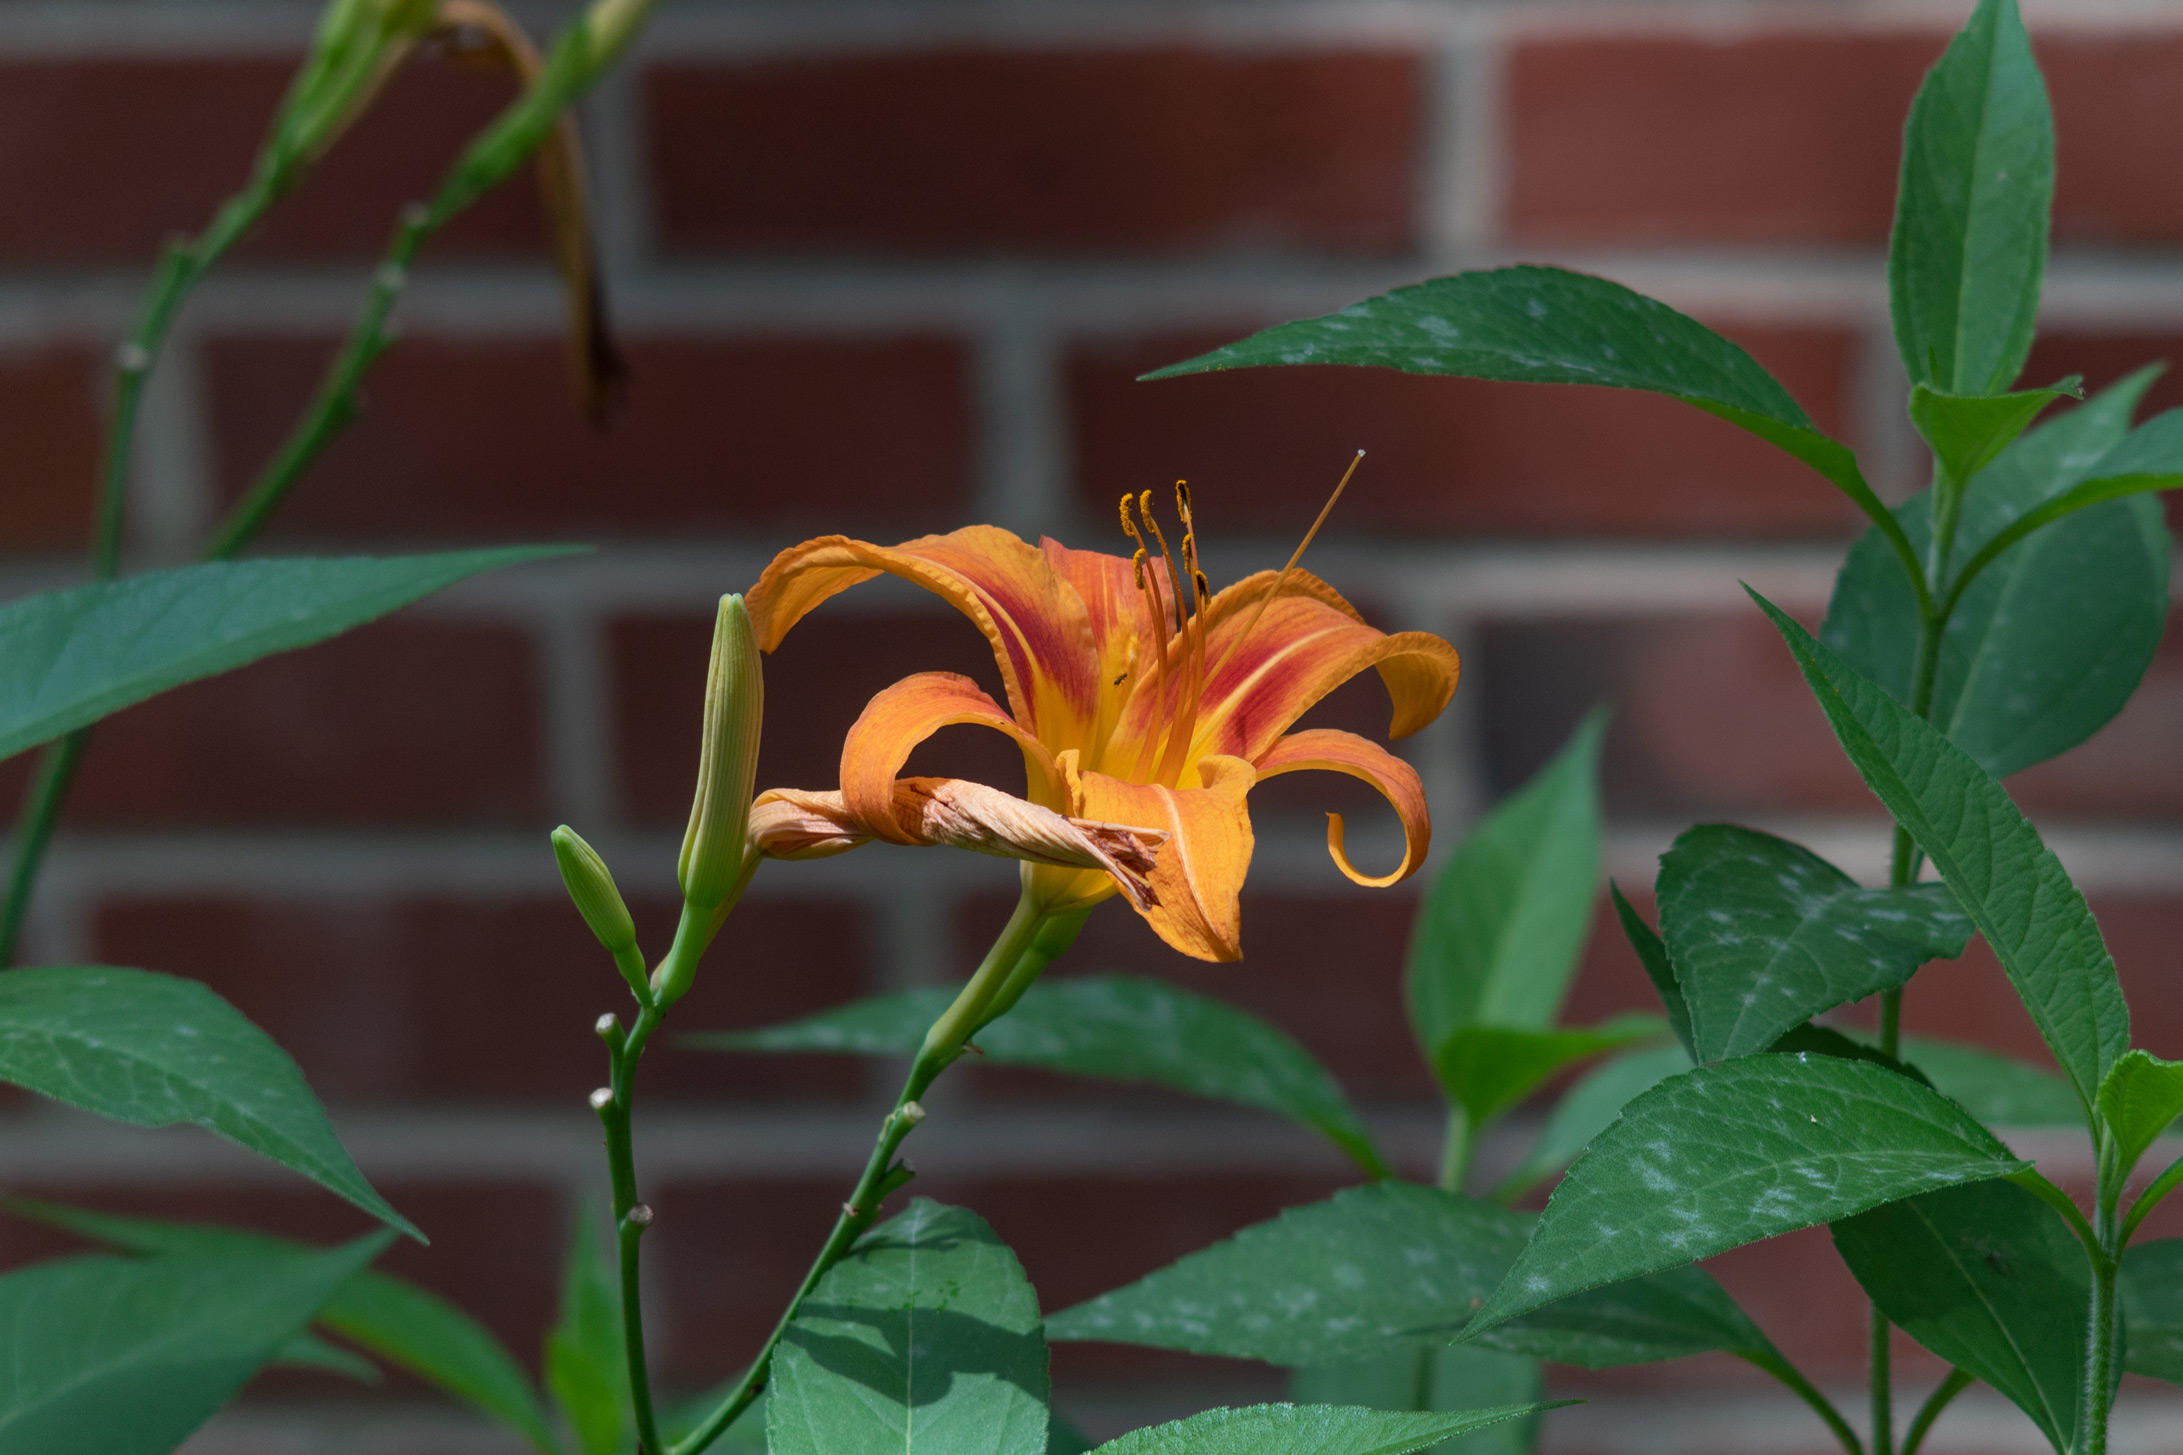 Orange flower with green leaves against a red brick background